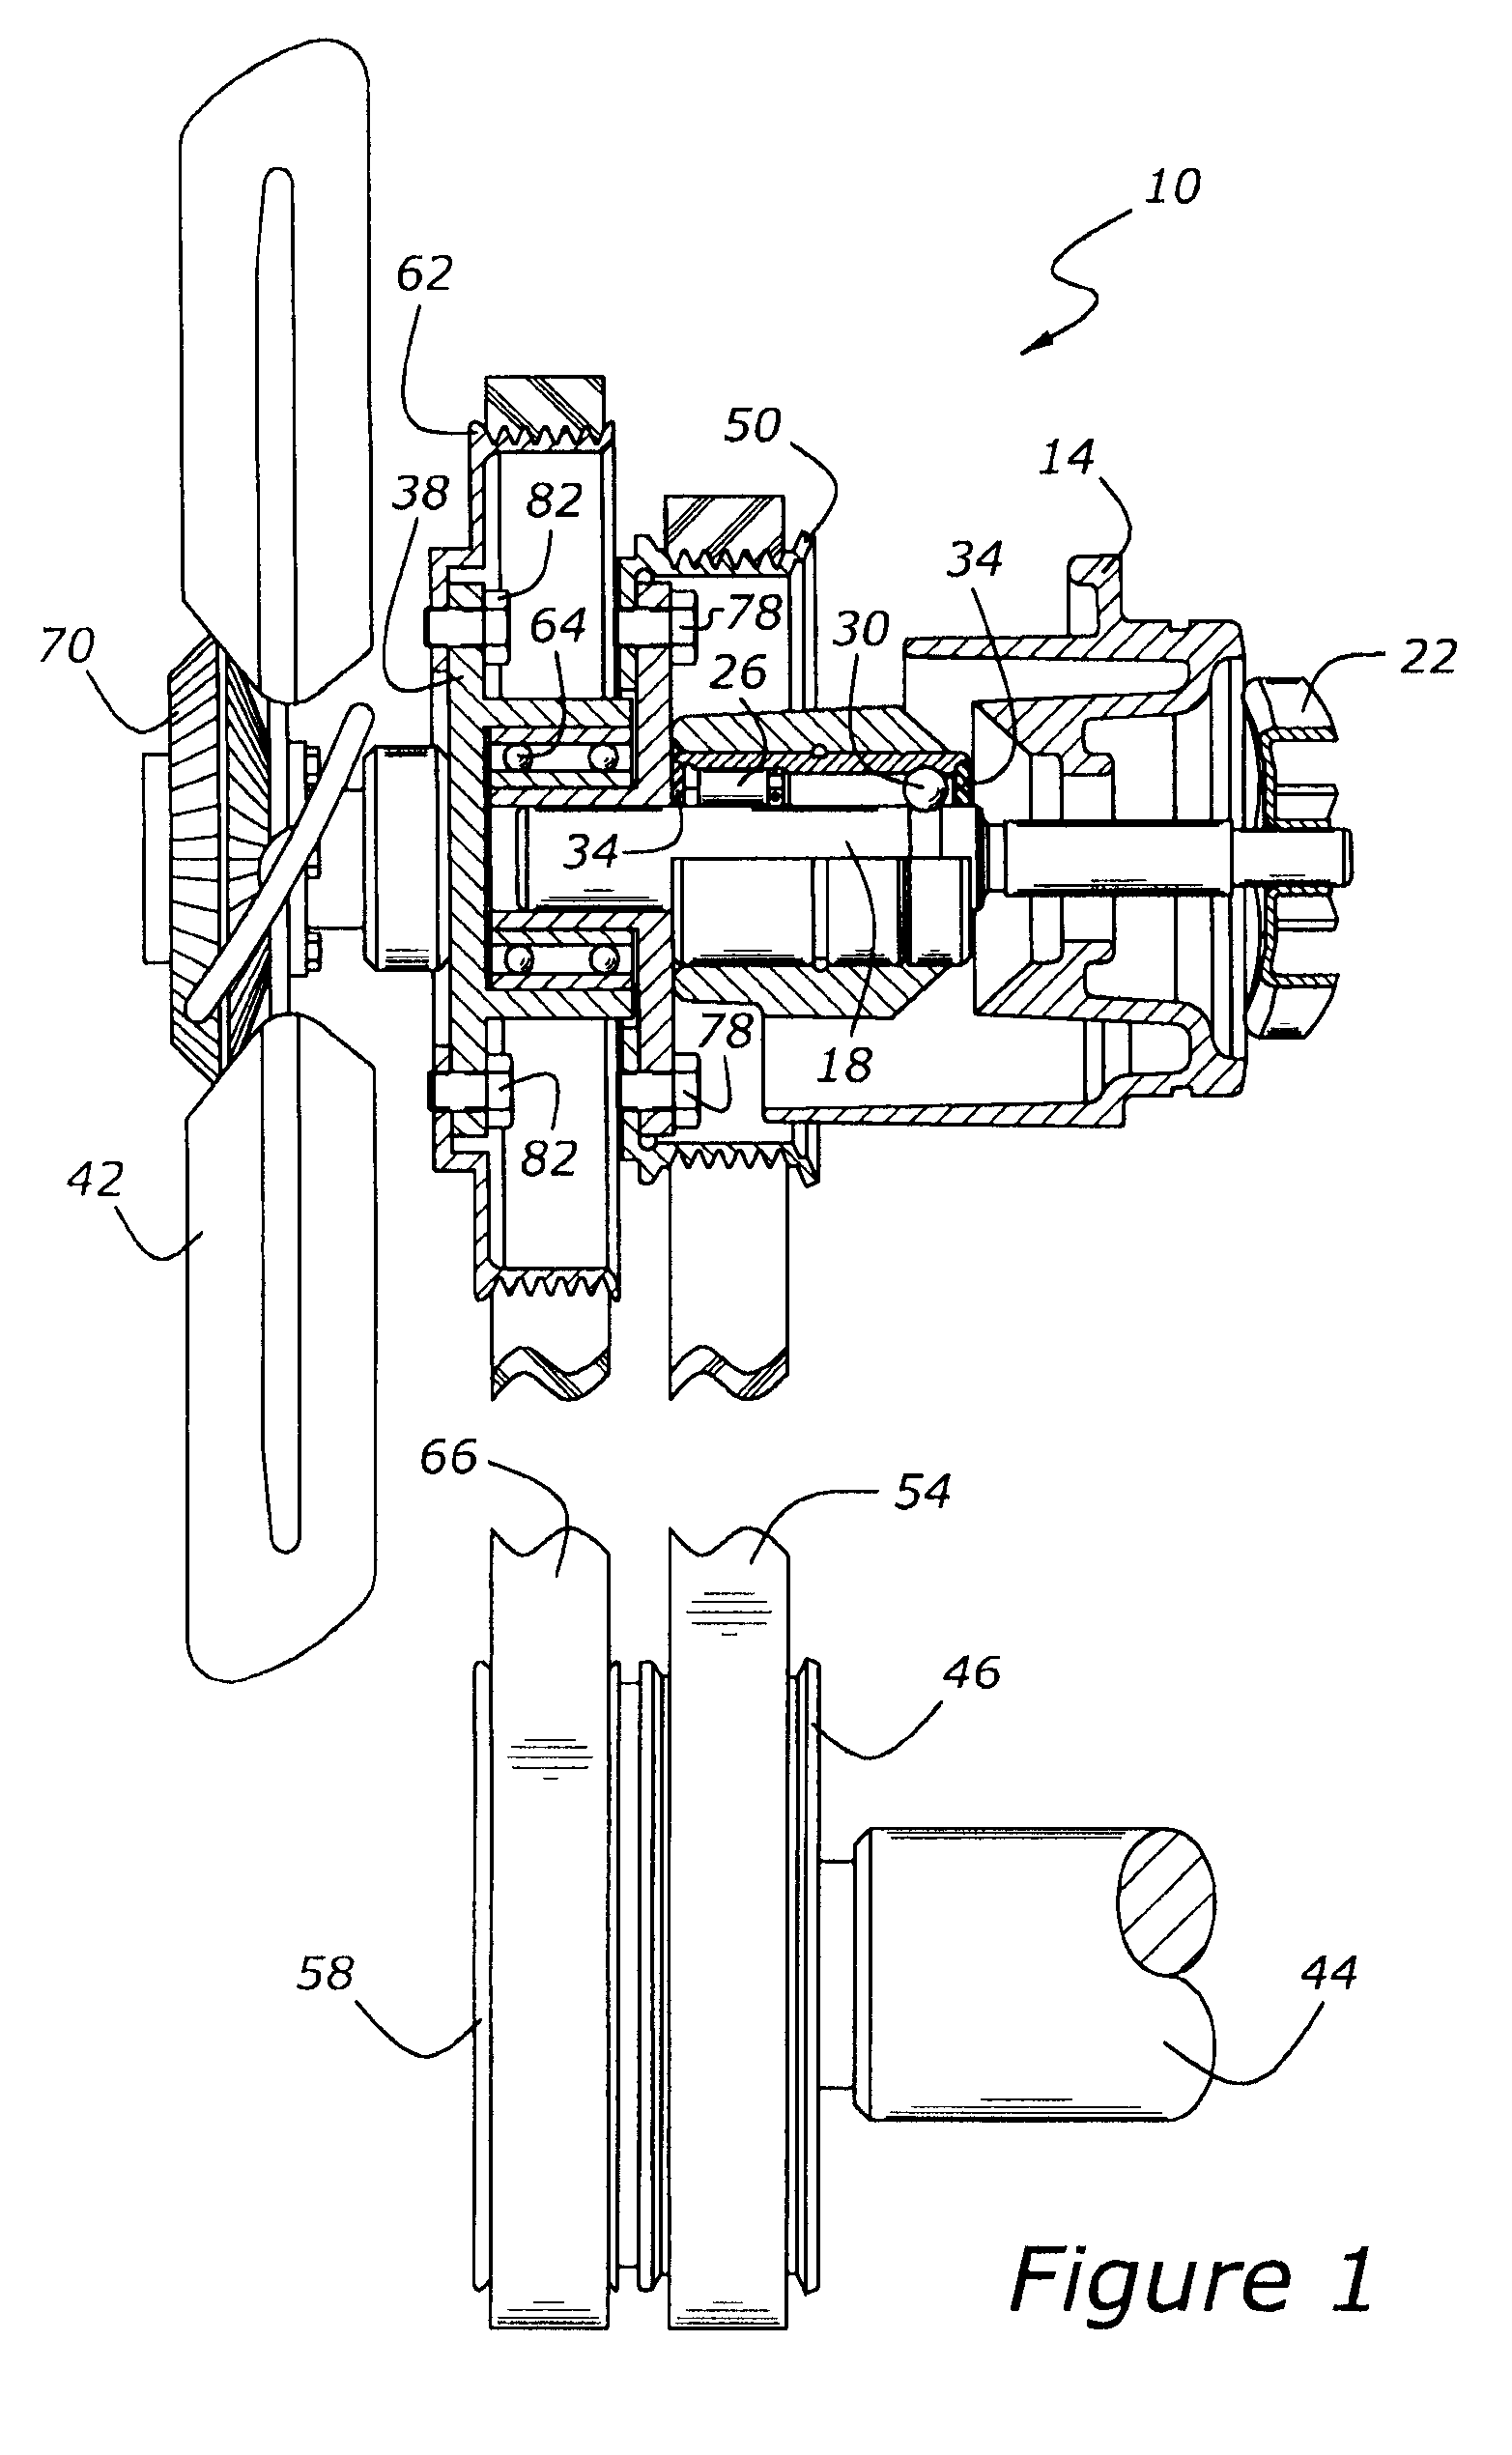 Dual drive radiator fan and coolant pump system for internal combustion engine